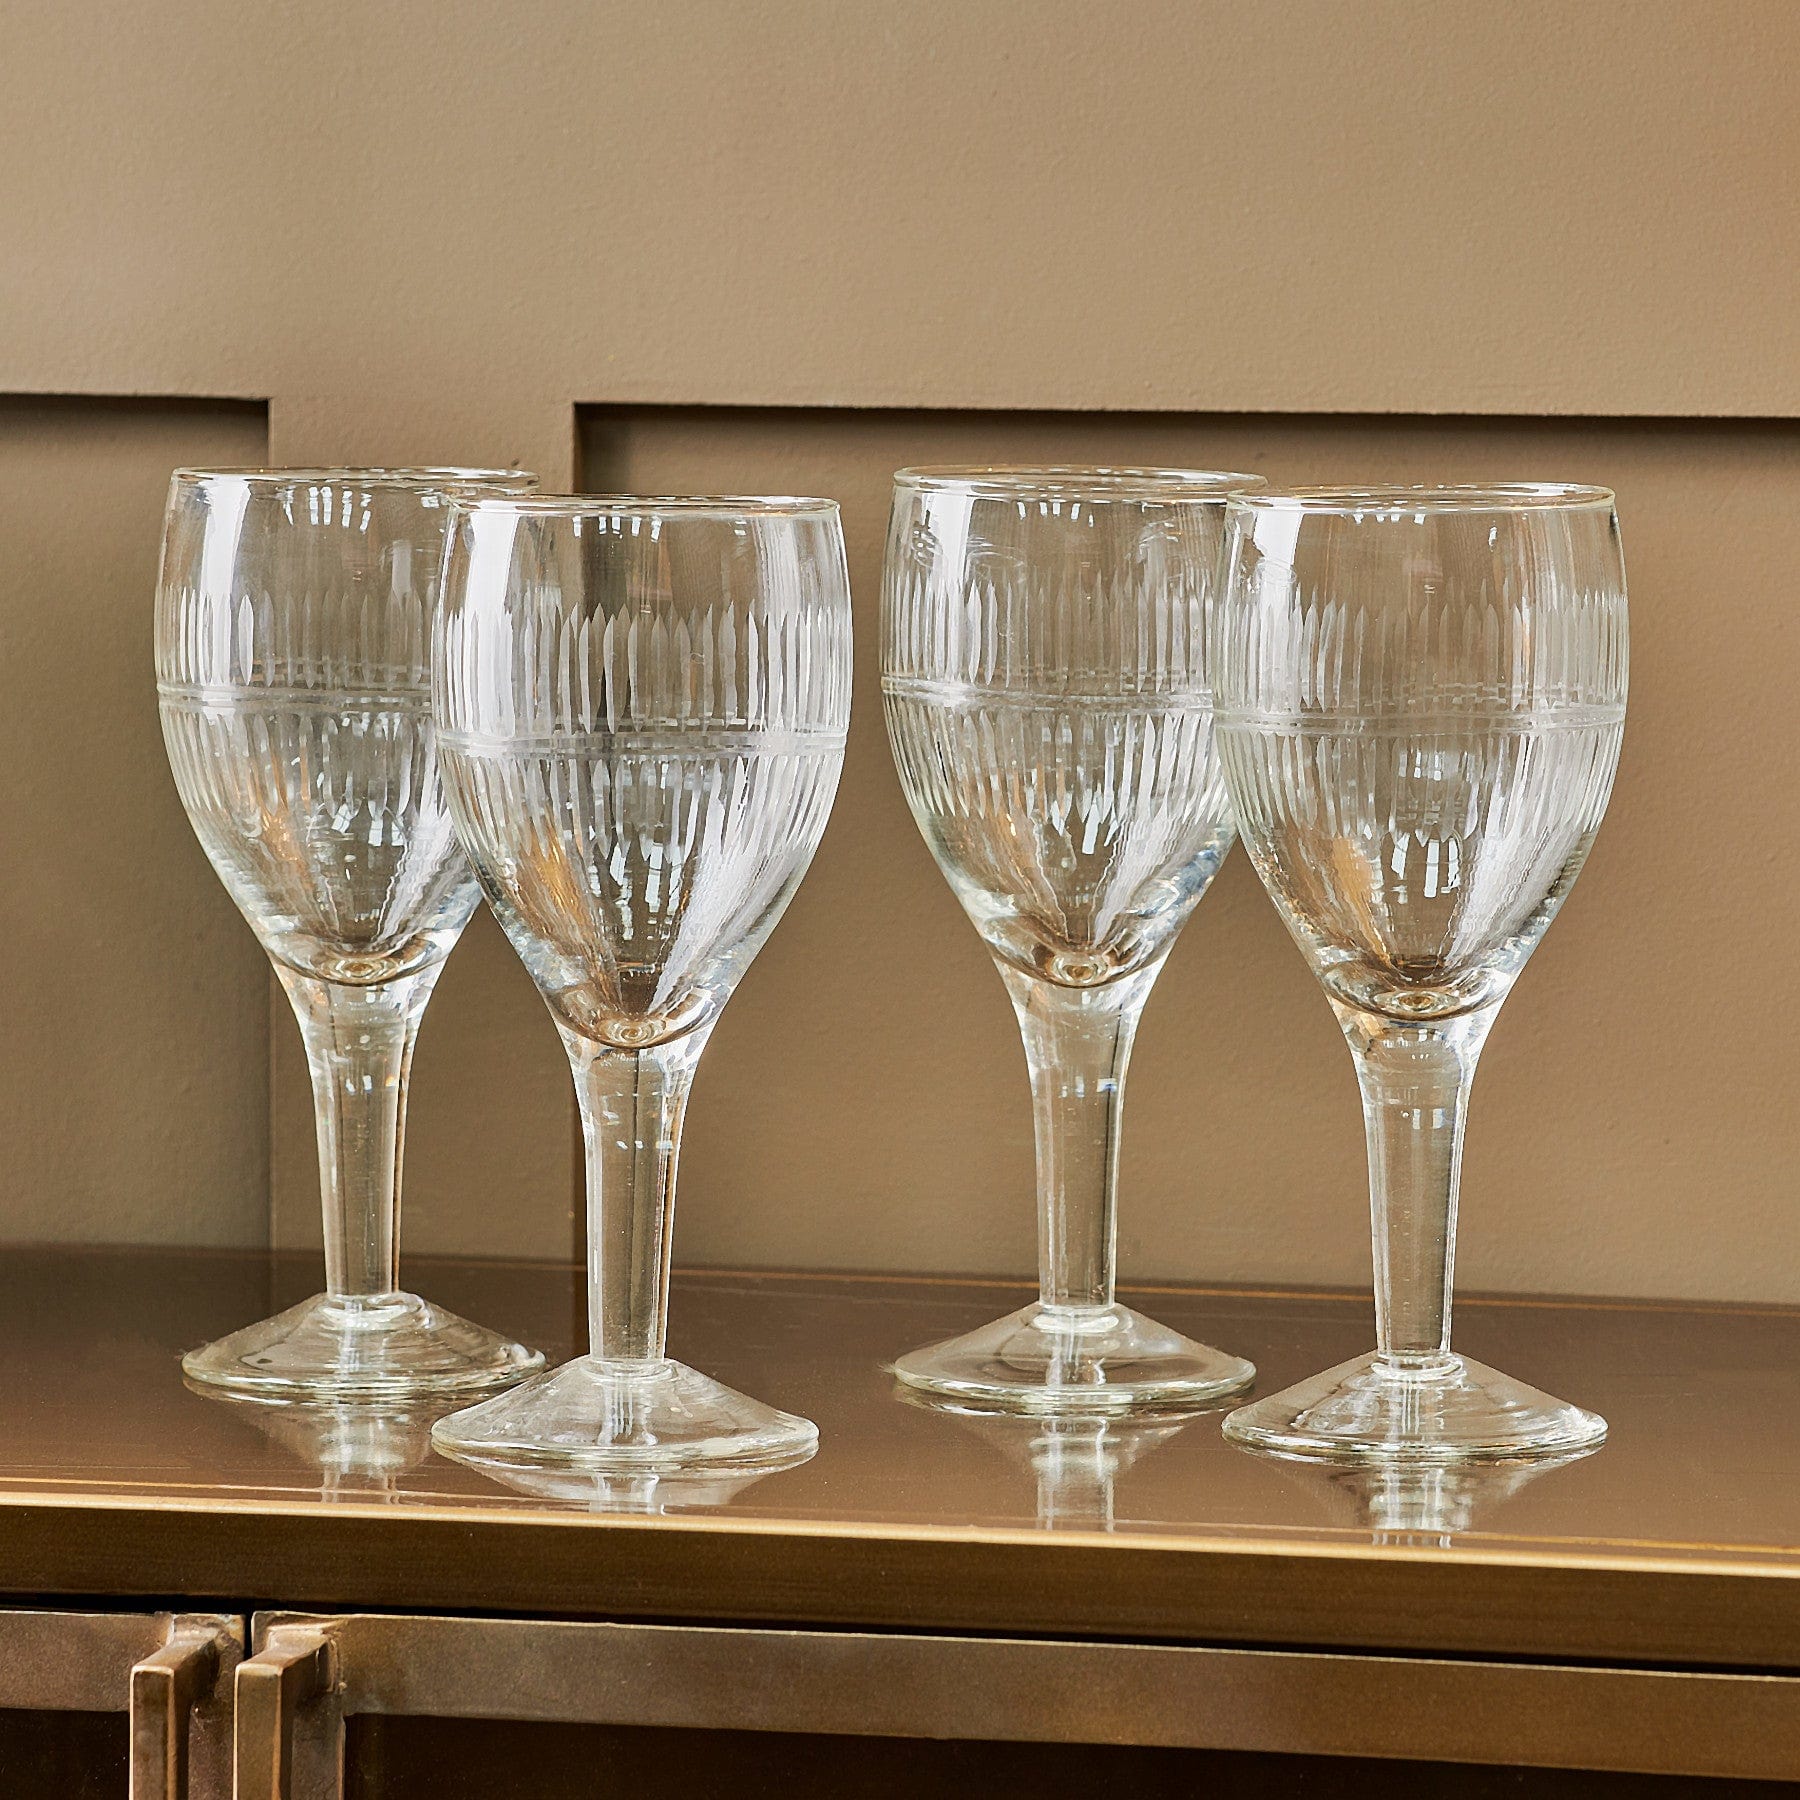 Four elegant wine glasses on a reflective surface with a neutral colored background